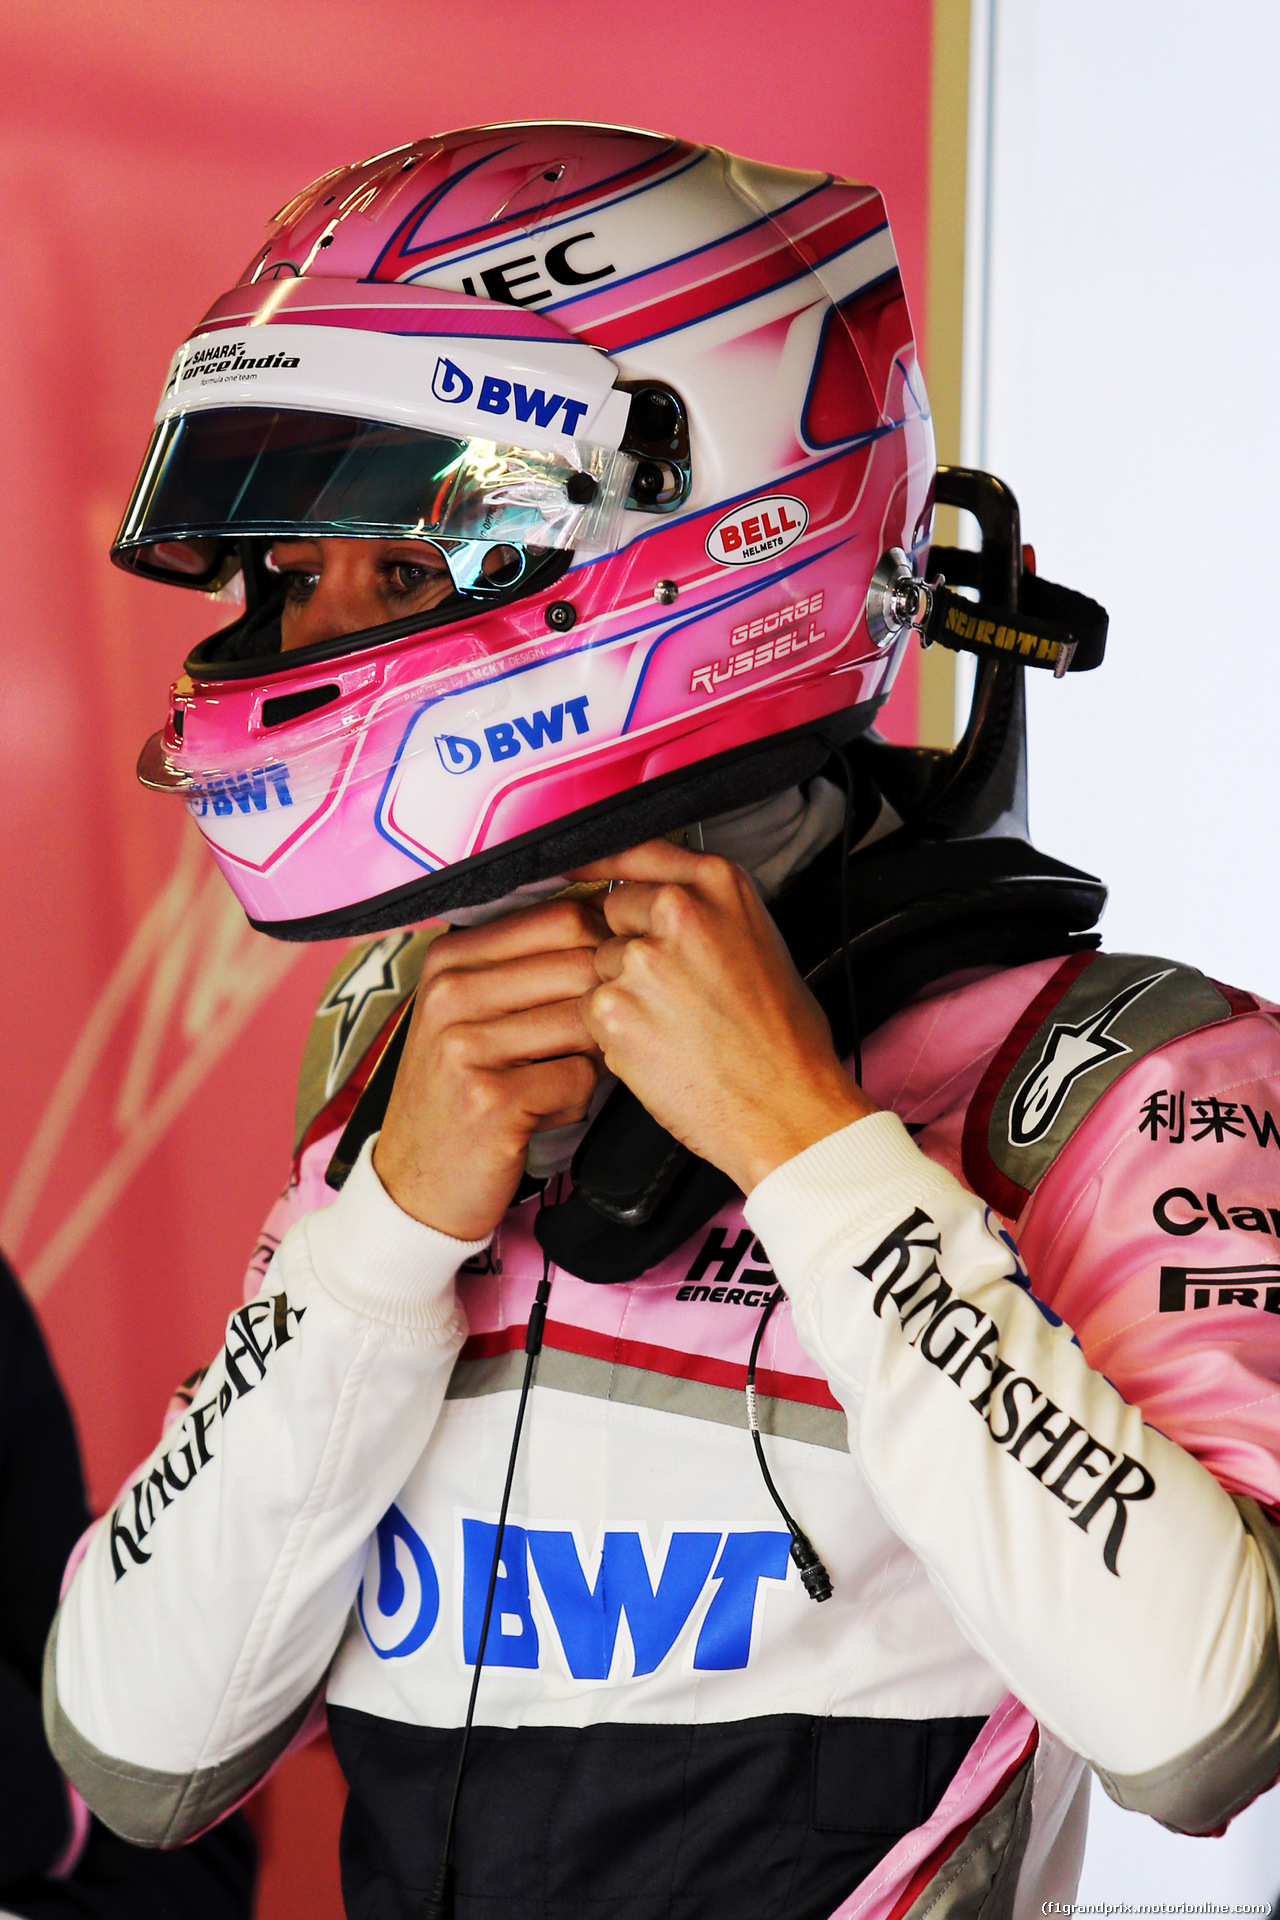 TEST F1 BARCELLONA 15 MAGGIO, George Russell (GBR) Sahara Force India F1 Team Test Driver.
15.05.2018.